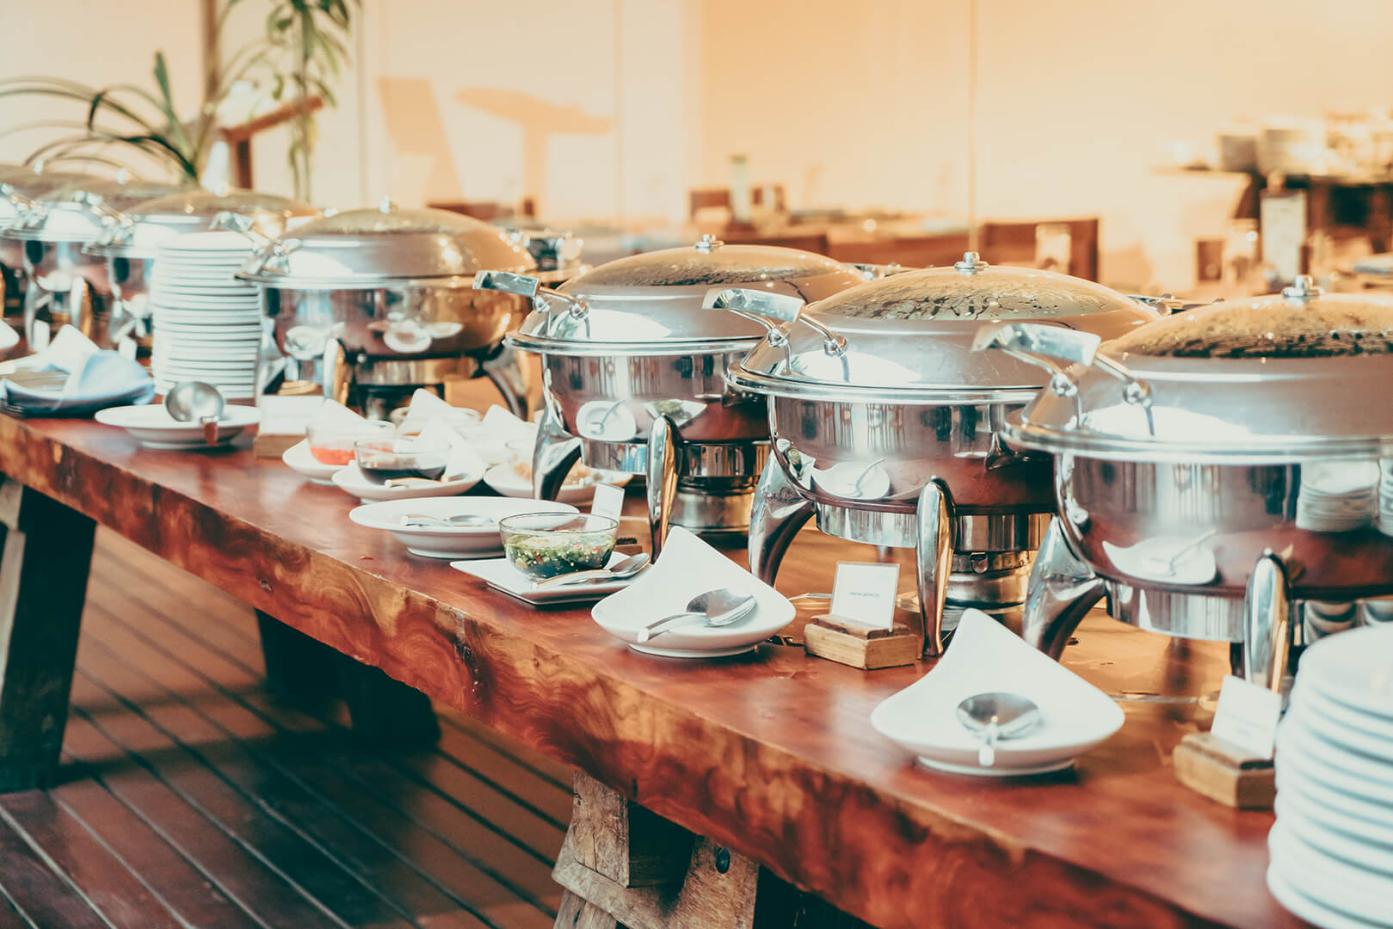 How Do Caterers Manage Their Finances and Resources?